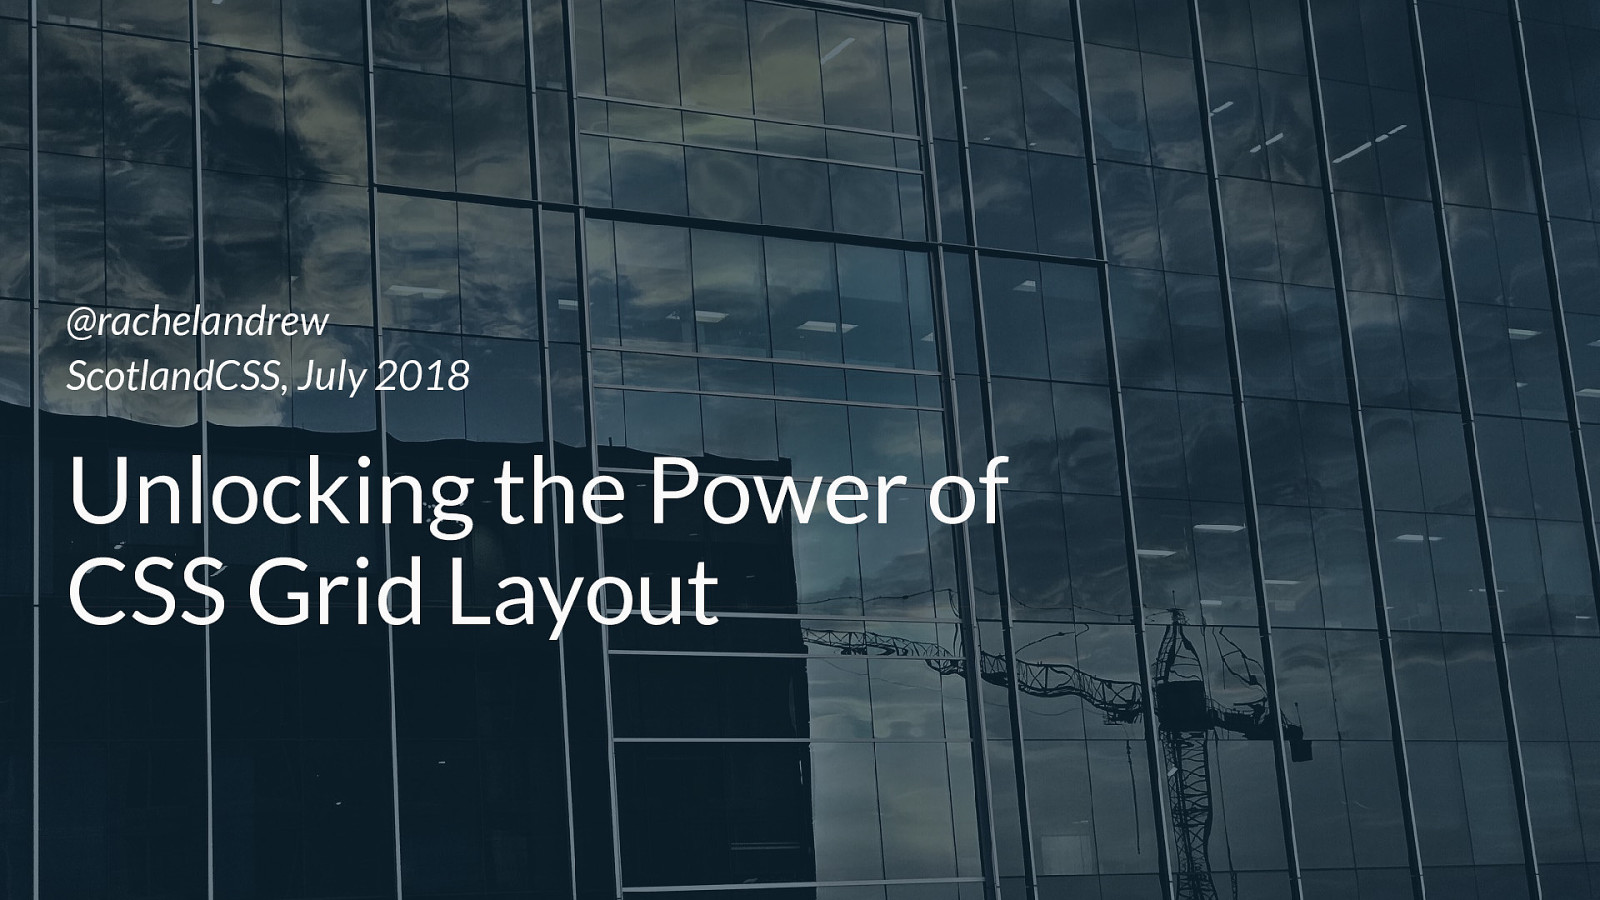 Unlocking the Power of CSS Grid Layout